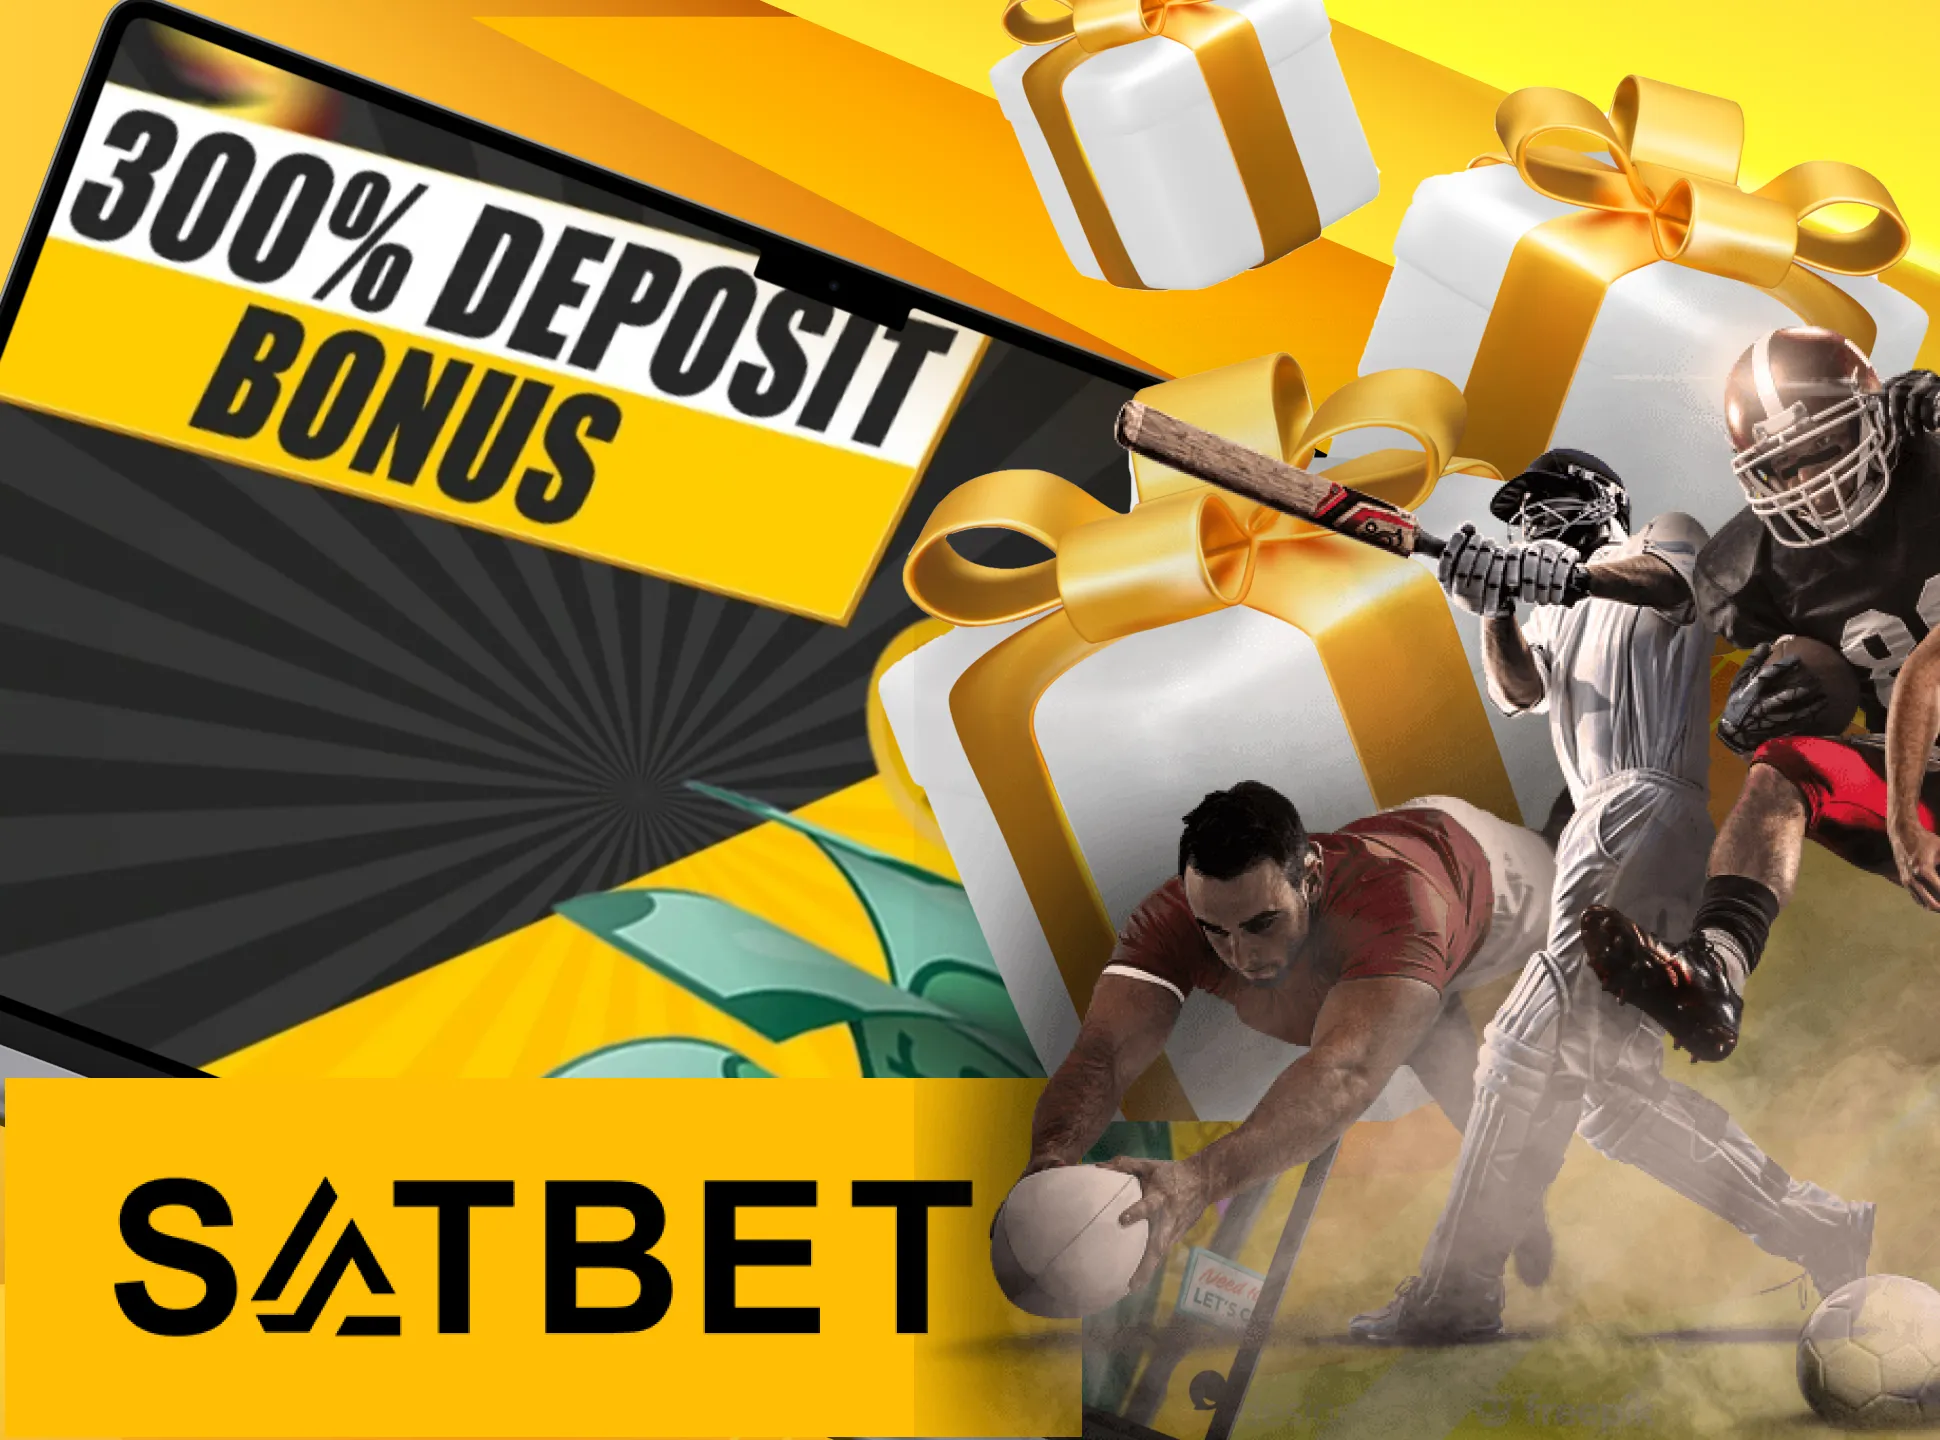 Get your Satbet sports welcome bonus by betting on sports.